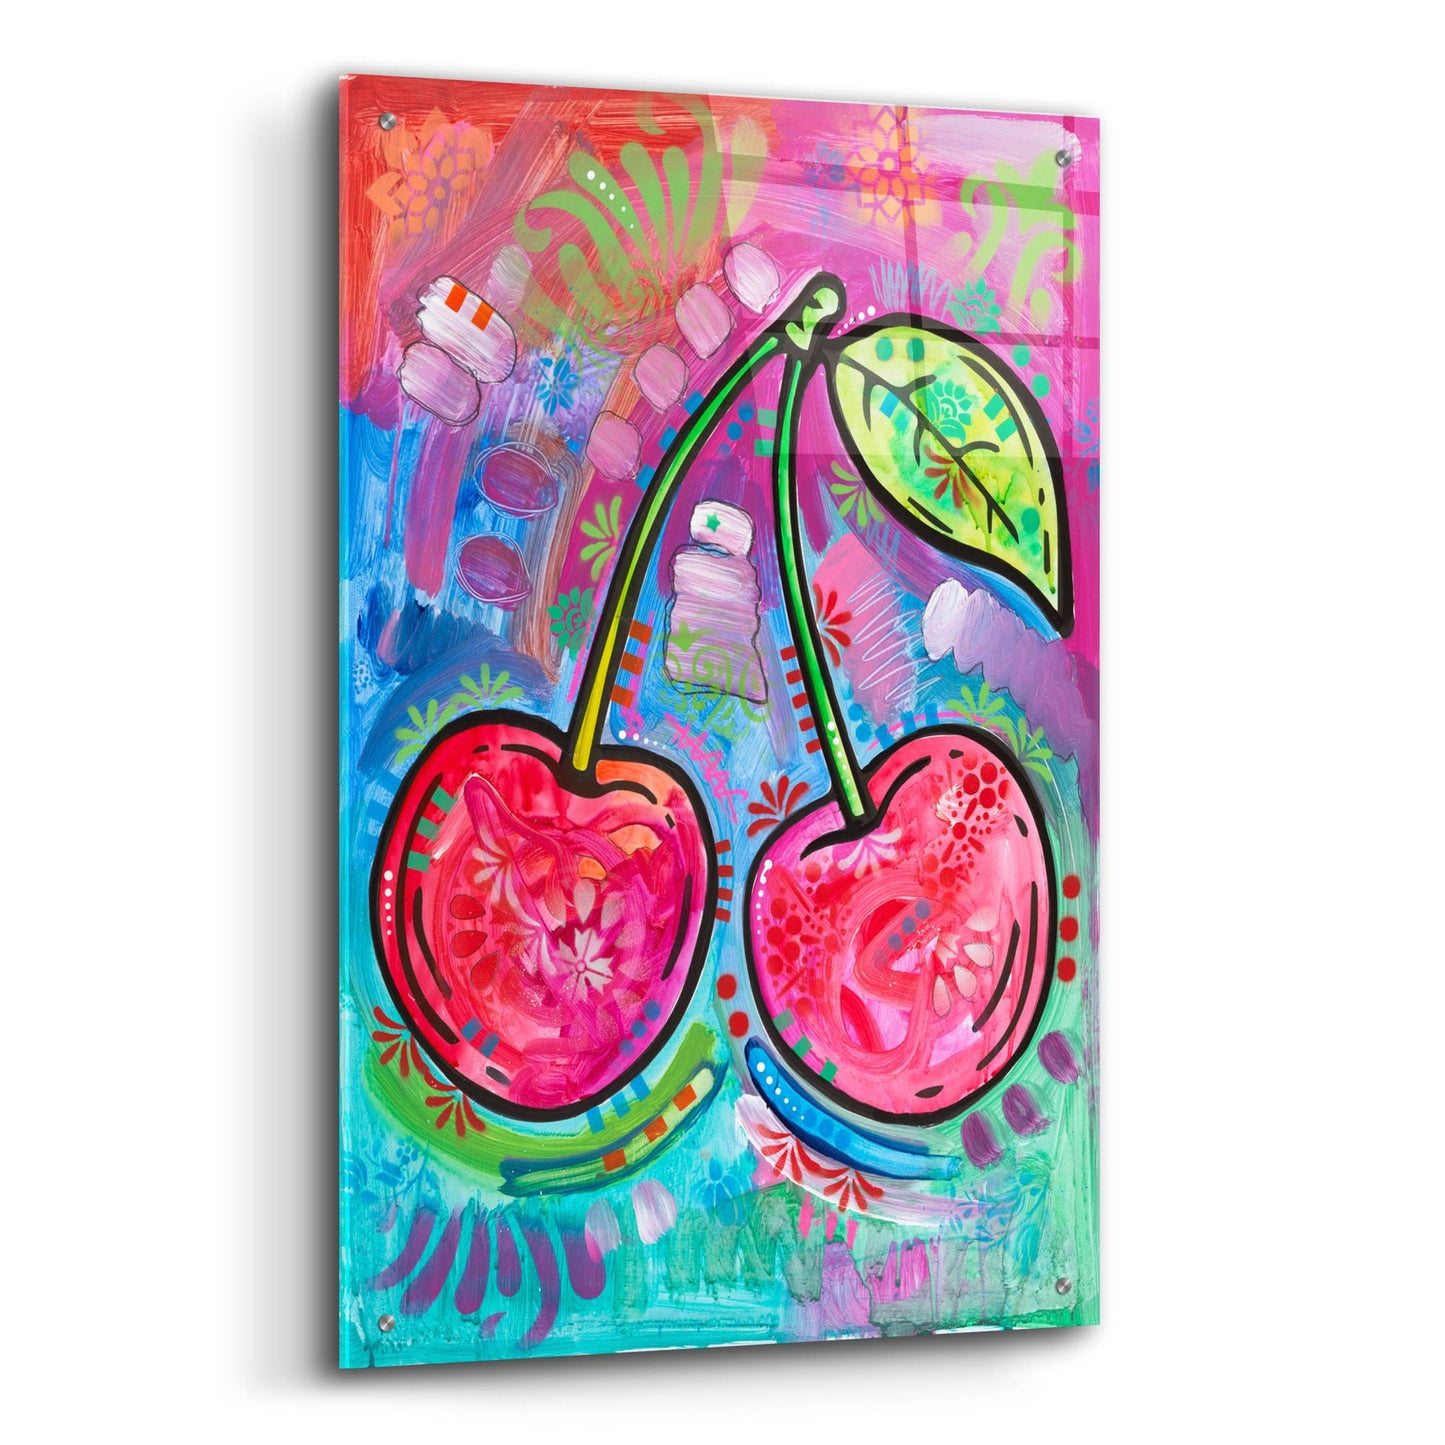 Epic Art 'Cherry Time' by Dean Russo, Acrylic Glass Wall Art,24x36